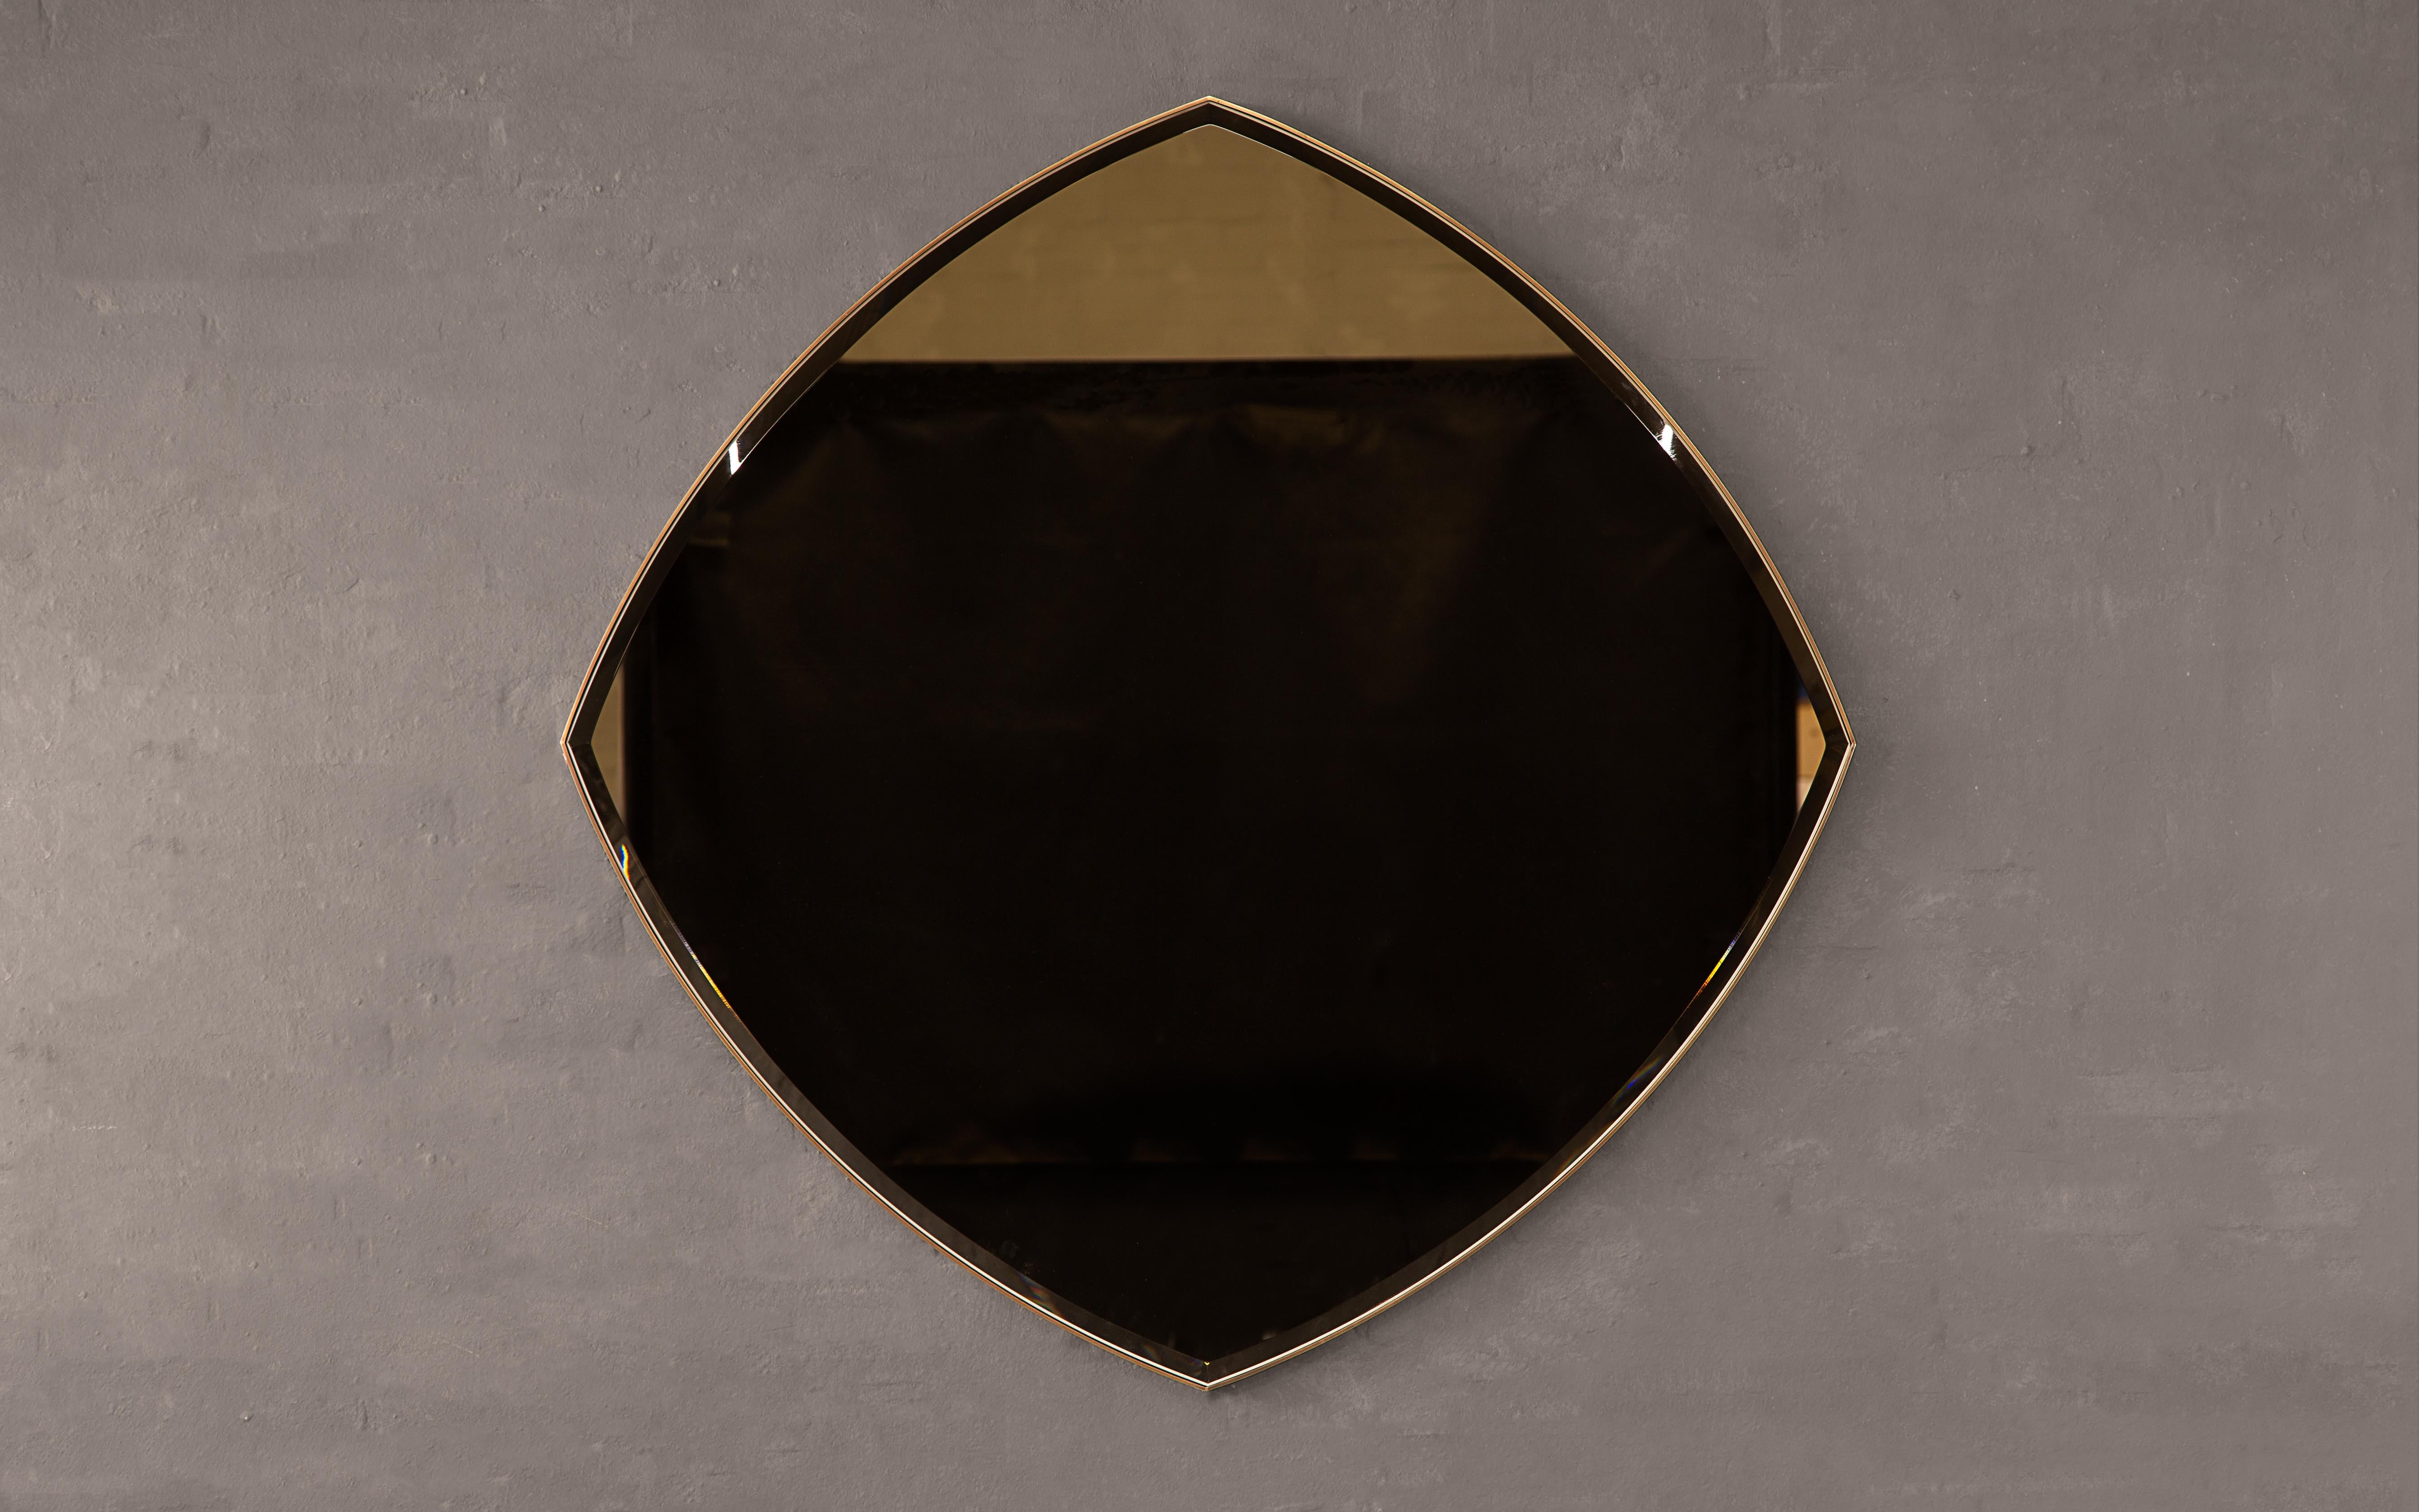 Alnwick mirror by Novocastrian
Dimensions: W 100 x D 2 x H 100 cm
Materials: Patinated Brass frame

Also available in:
80cm x 80cm x 2cm/ 120cm x 120cm x 2cm

We are metalworkers, architects, welders, artists, makers, engineers, and